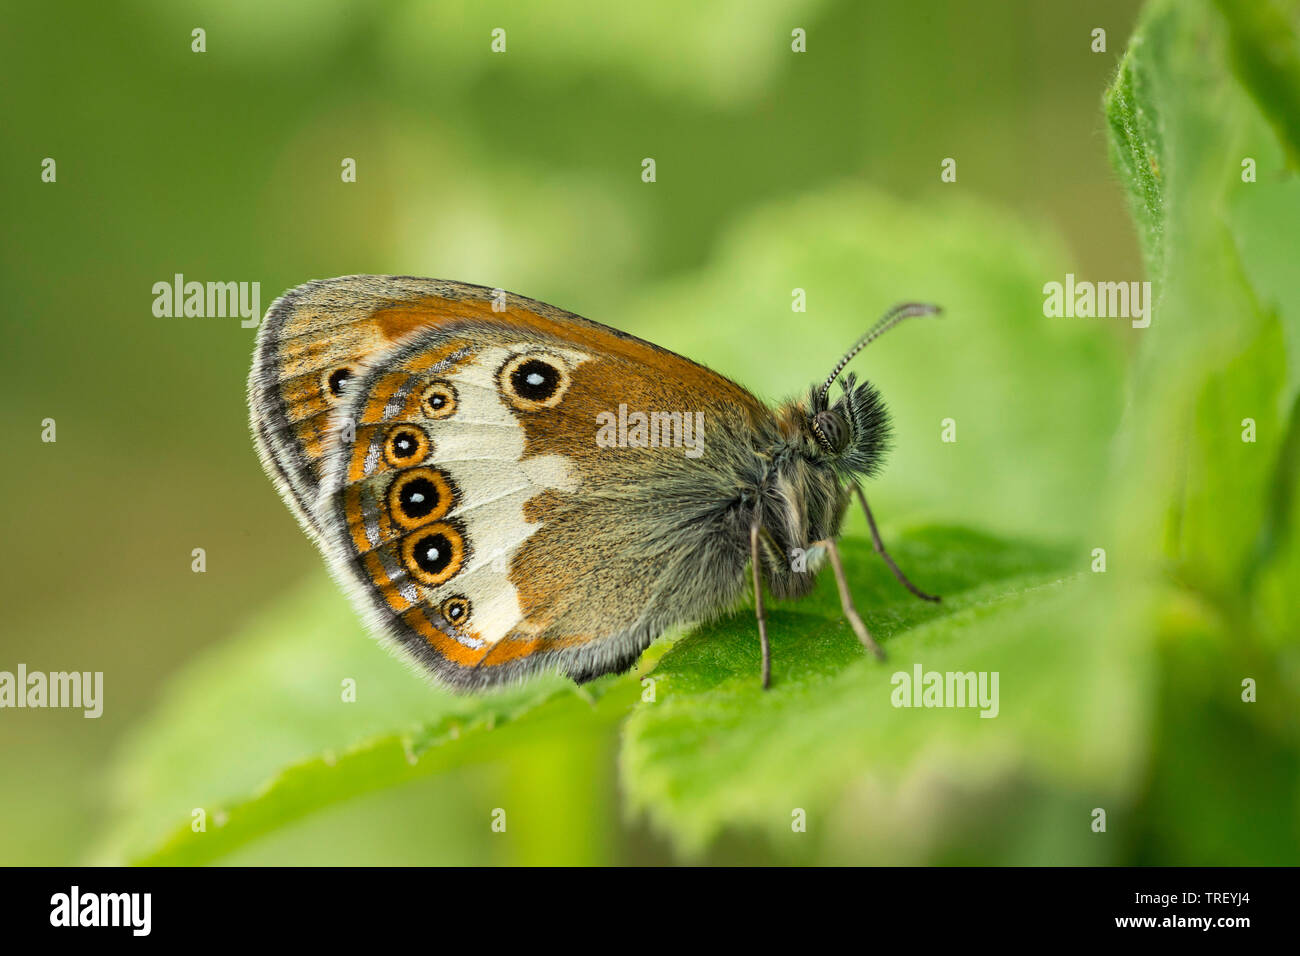 Pearly Heath (Coenonympha arcania). Butterfly on a leaf. Germany Stock Photo